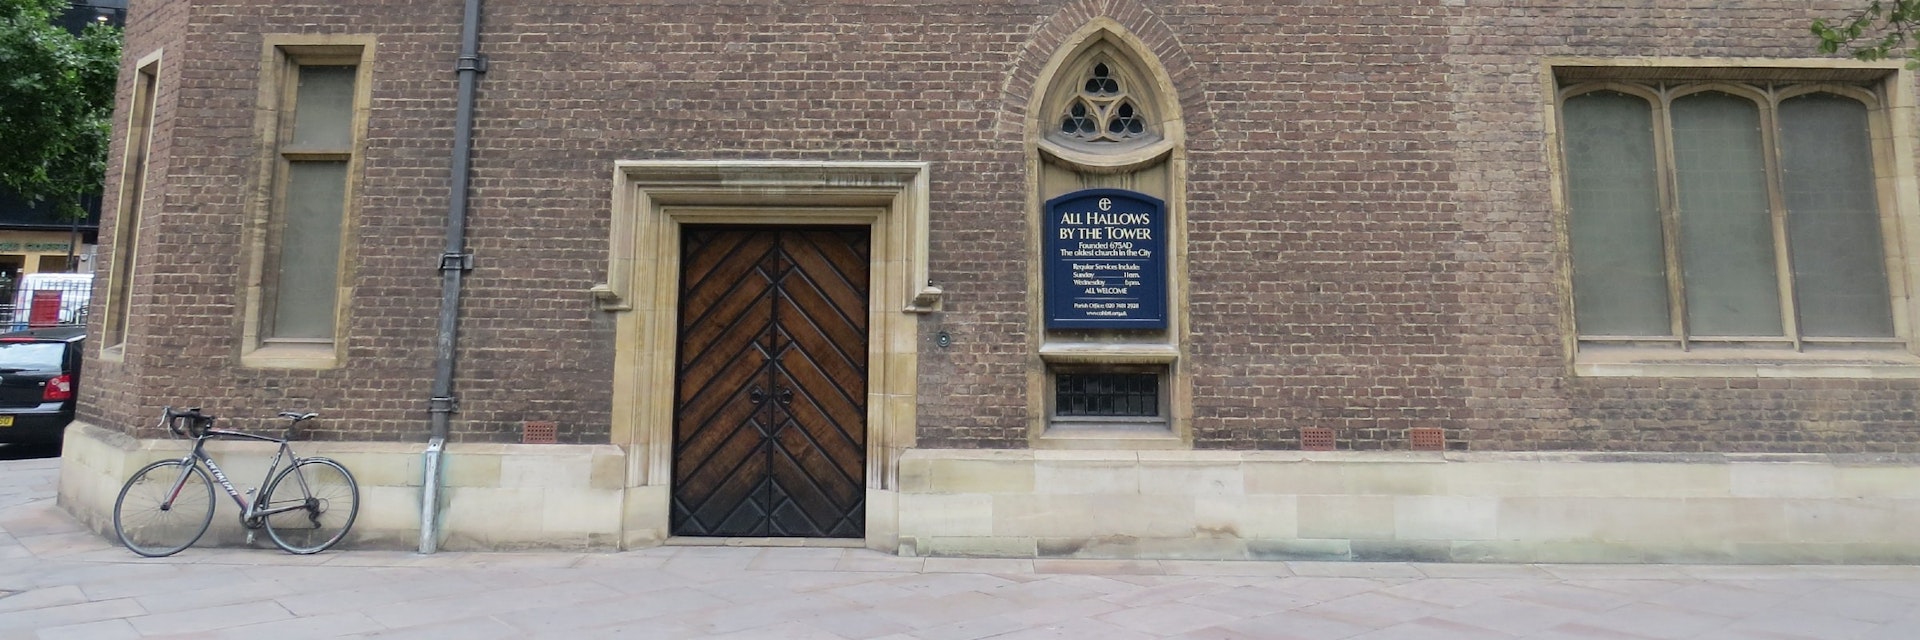 The exterior of All Hallows by the Tower, a  church near the Tower of London